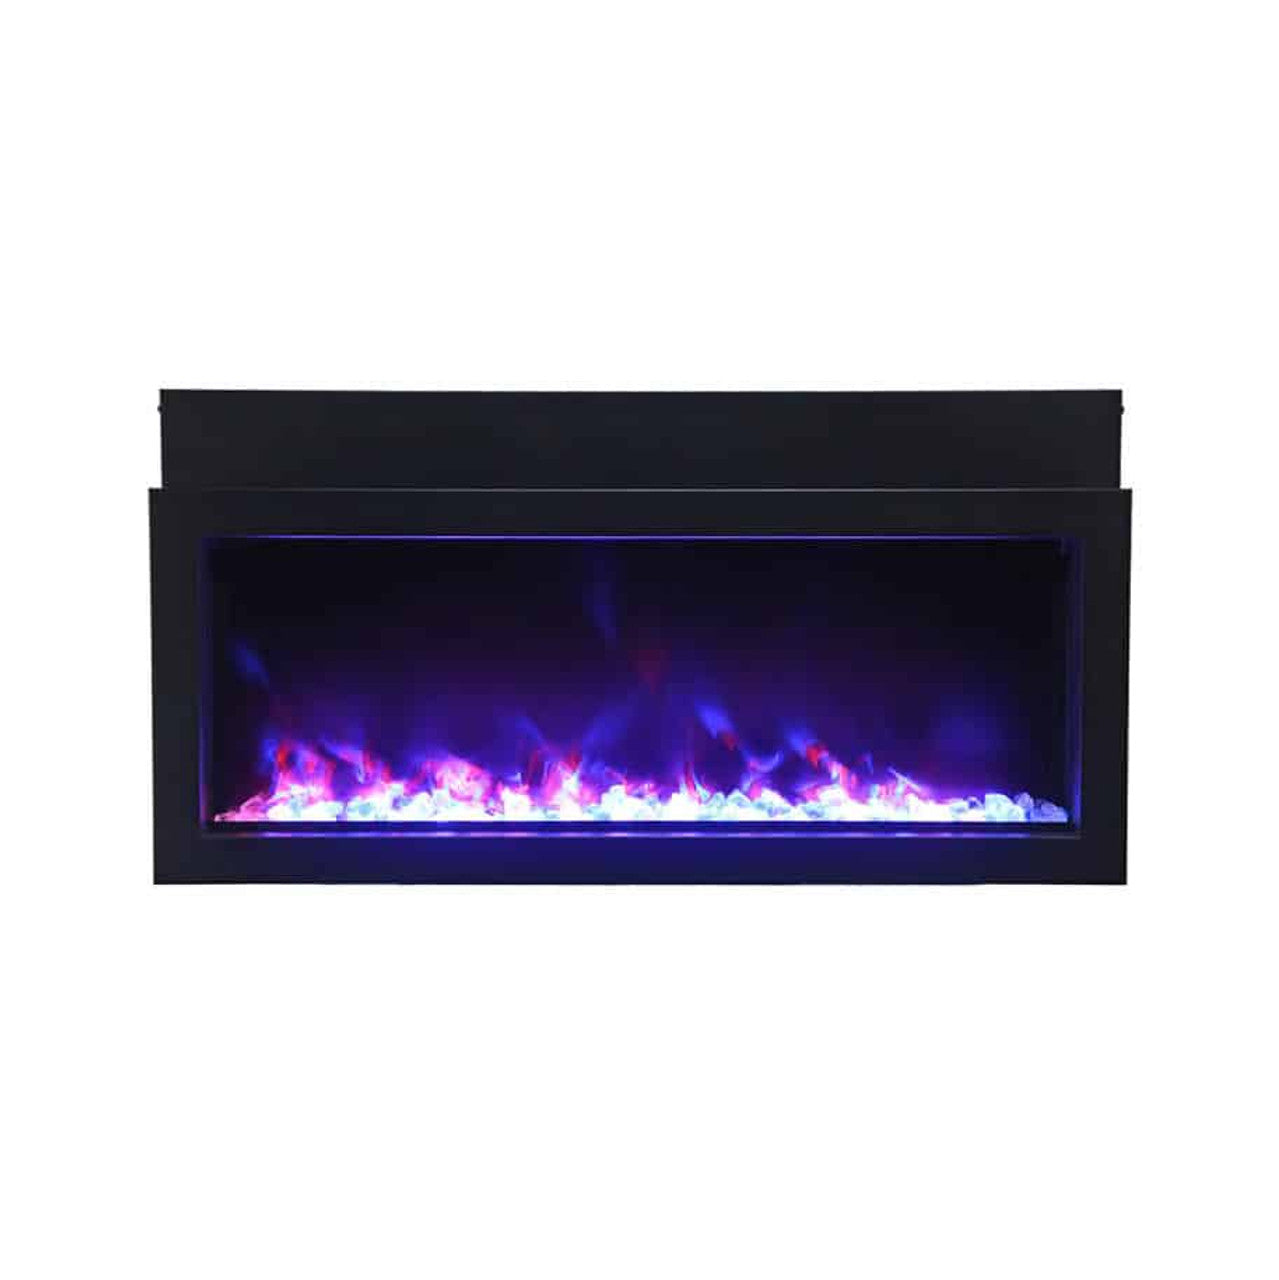 Amantii 50" Panorama Extra Slim Electric Fireplace -BI-50-XTRASLIM- Front View With Fire Glass Violet Flame